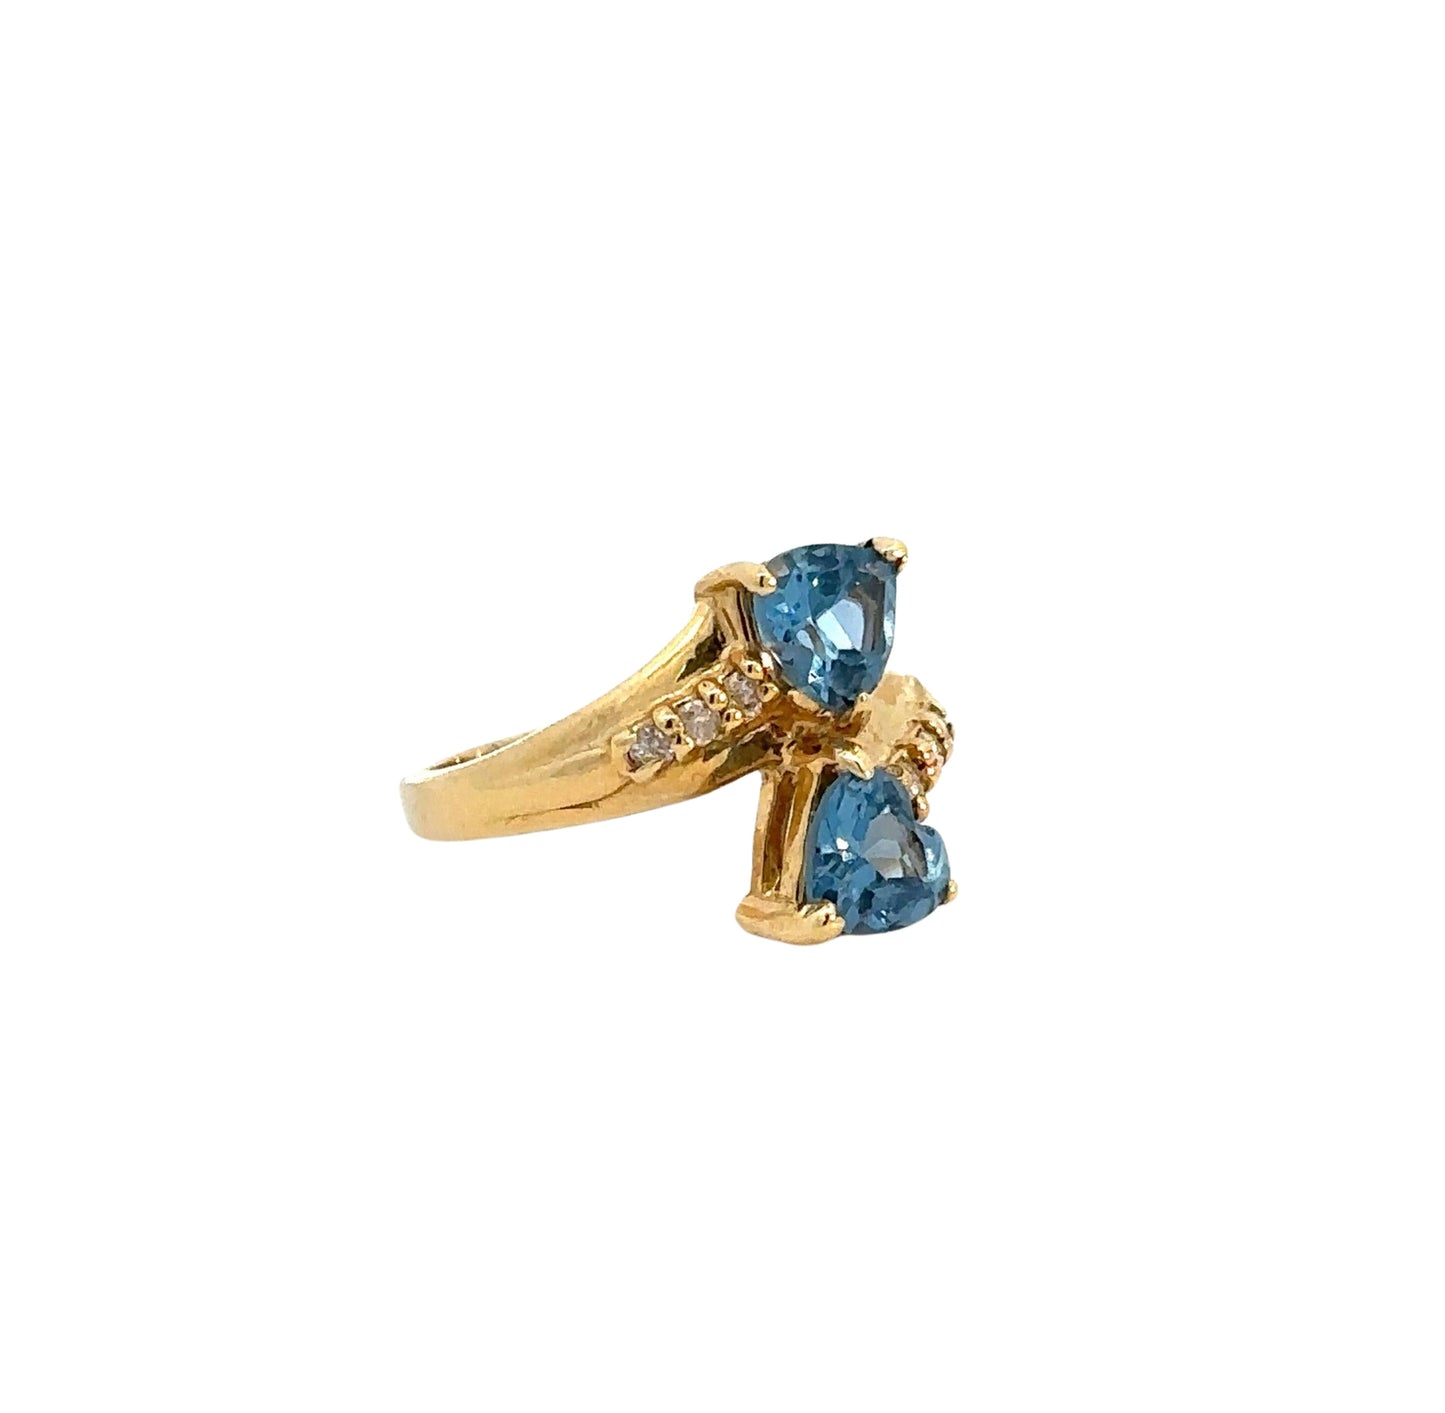 Diagonal view of blue gemstone and diamond ring